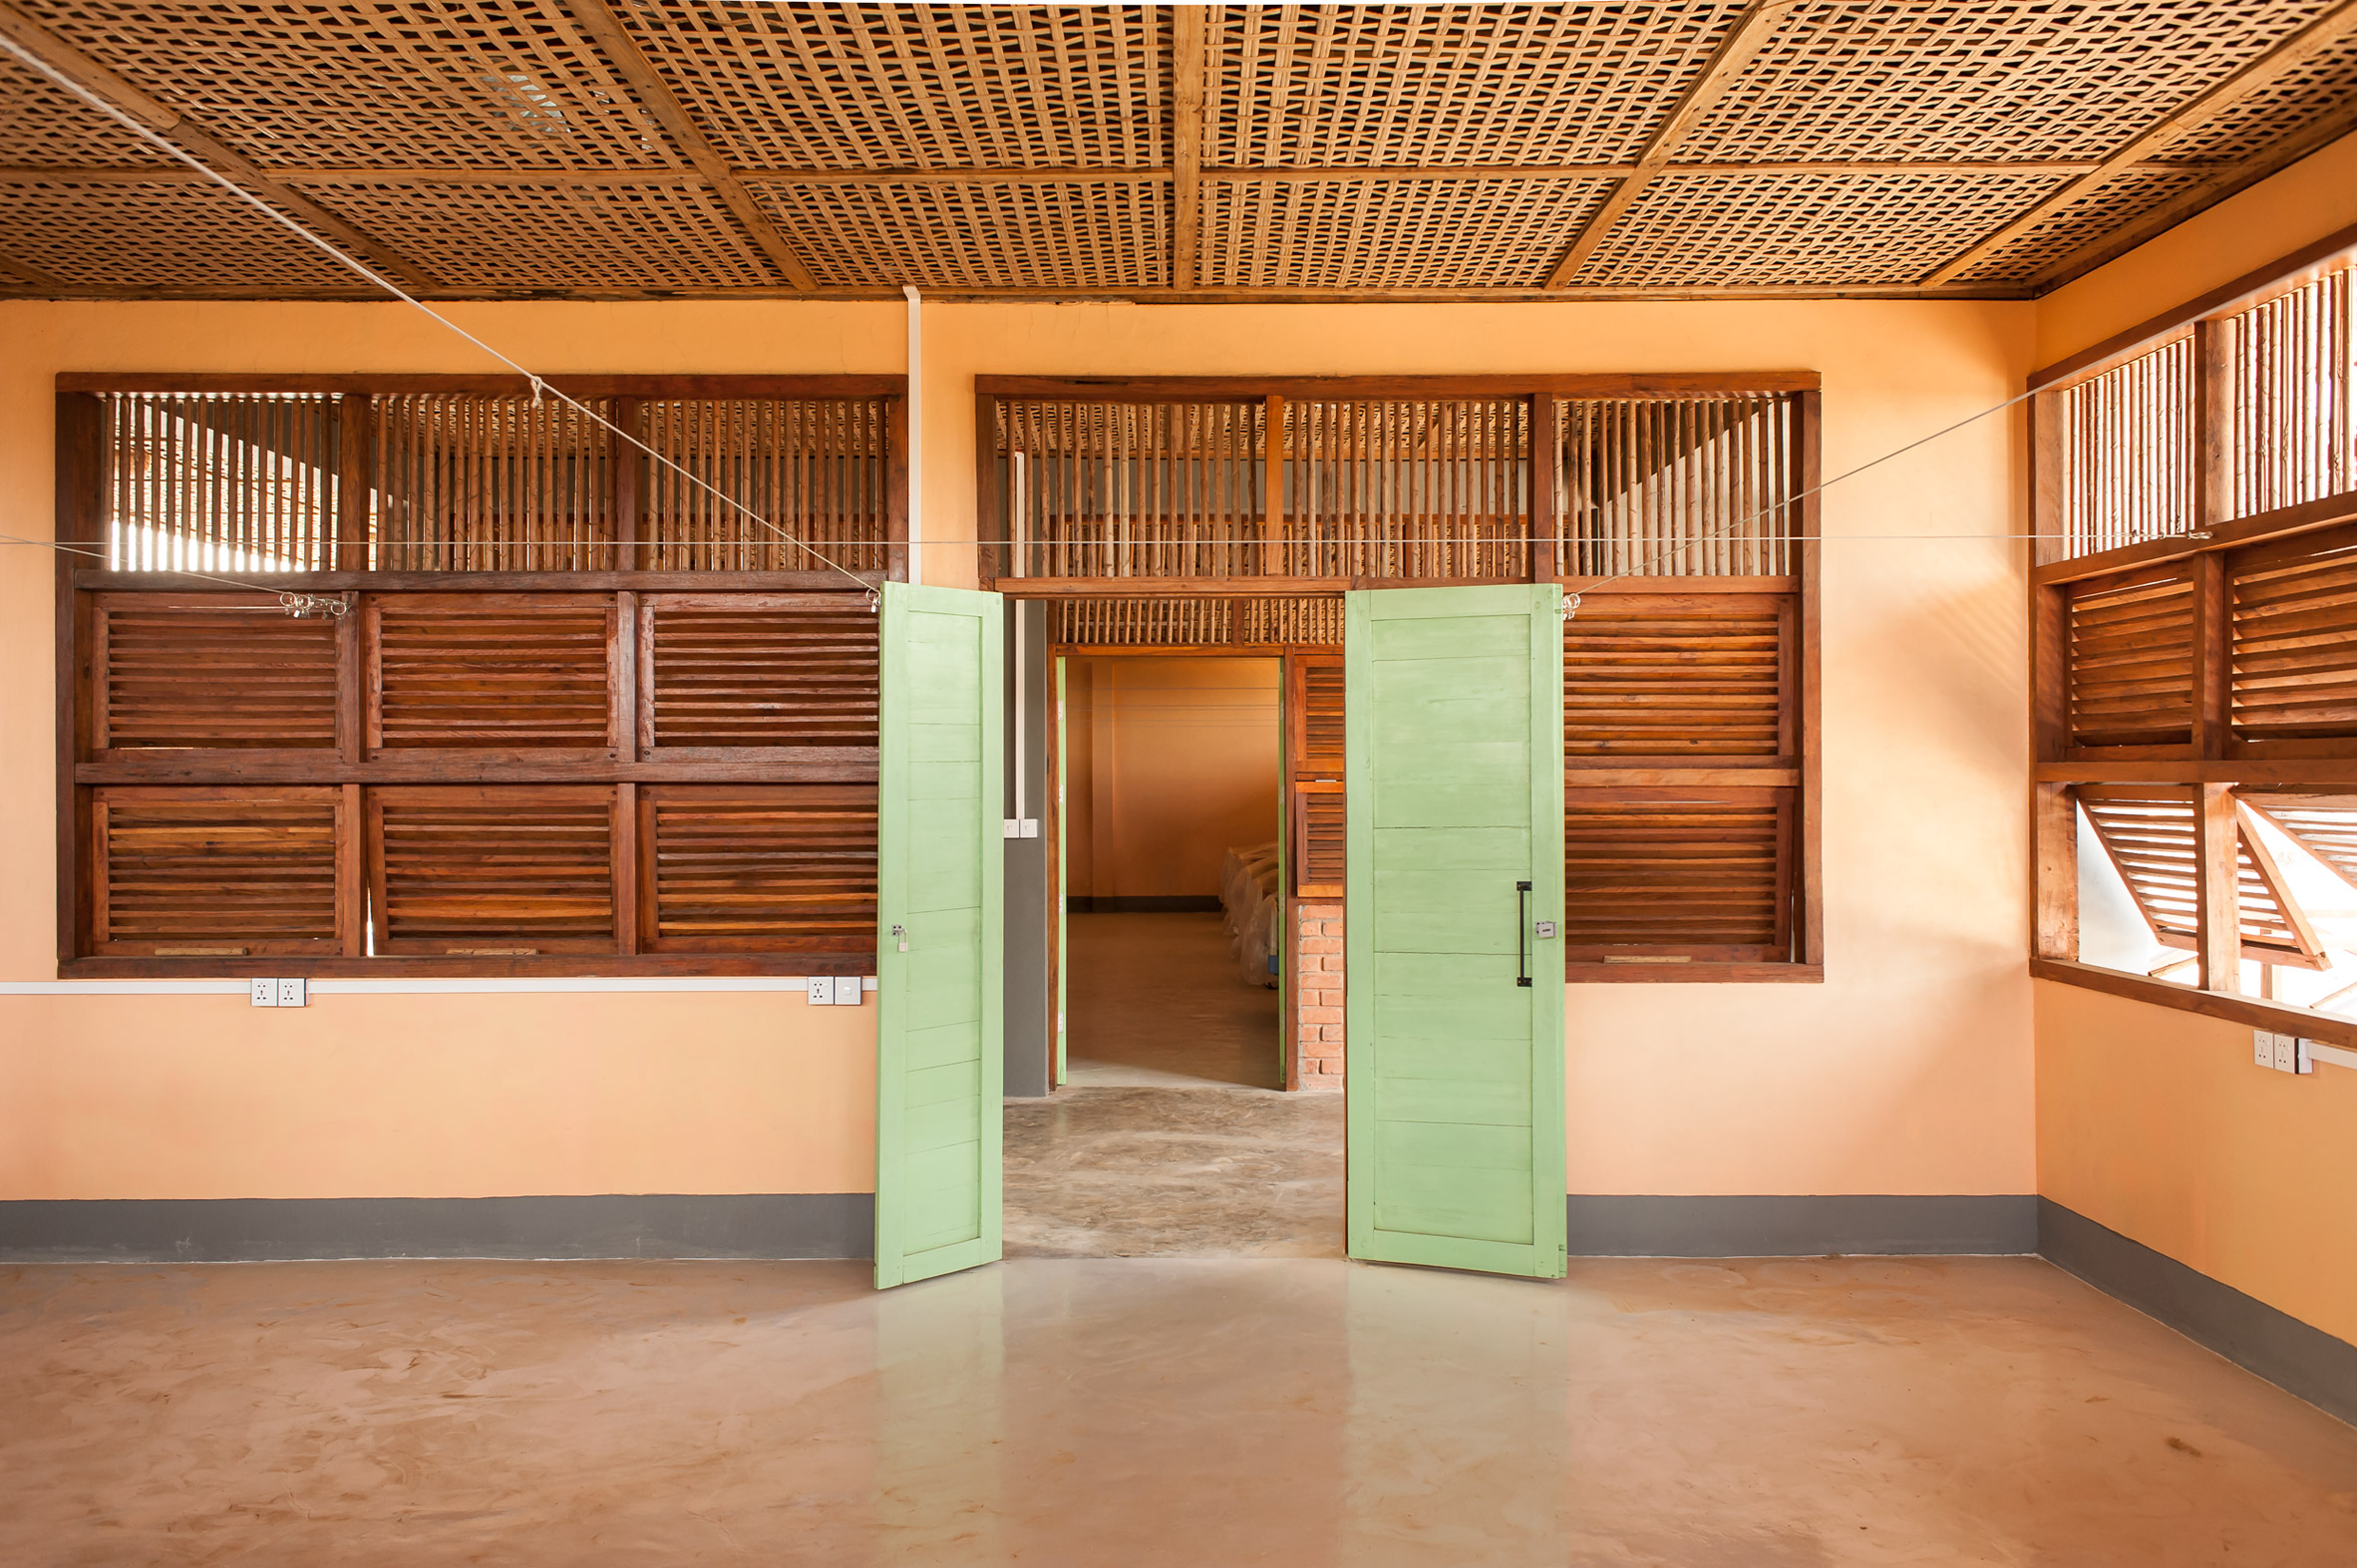 Room with timber and bamboo features and green doors